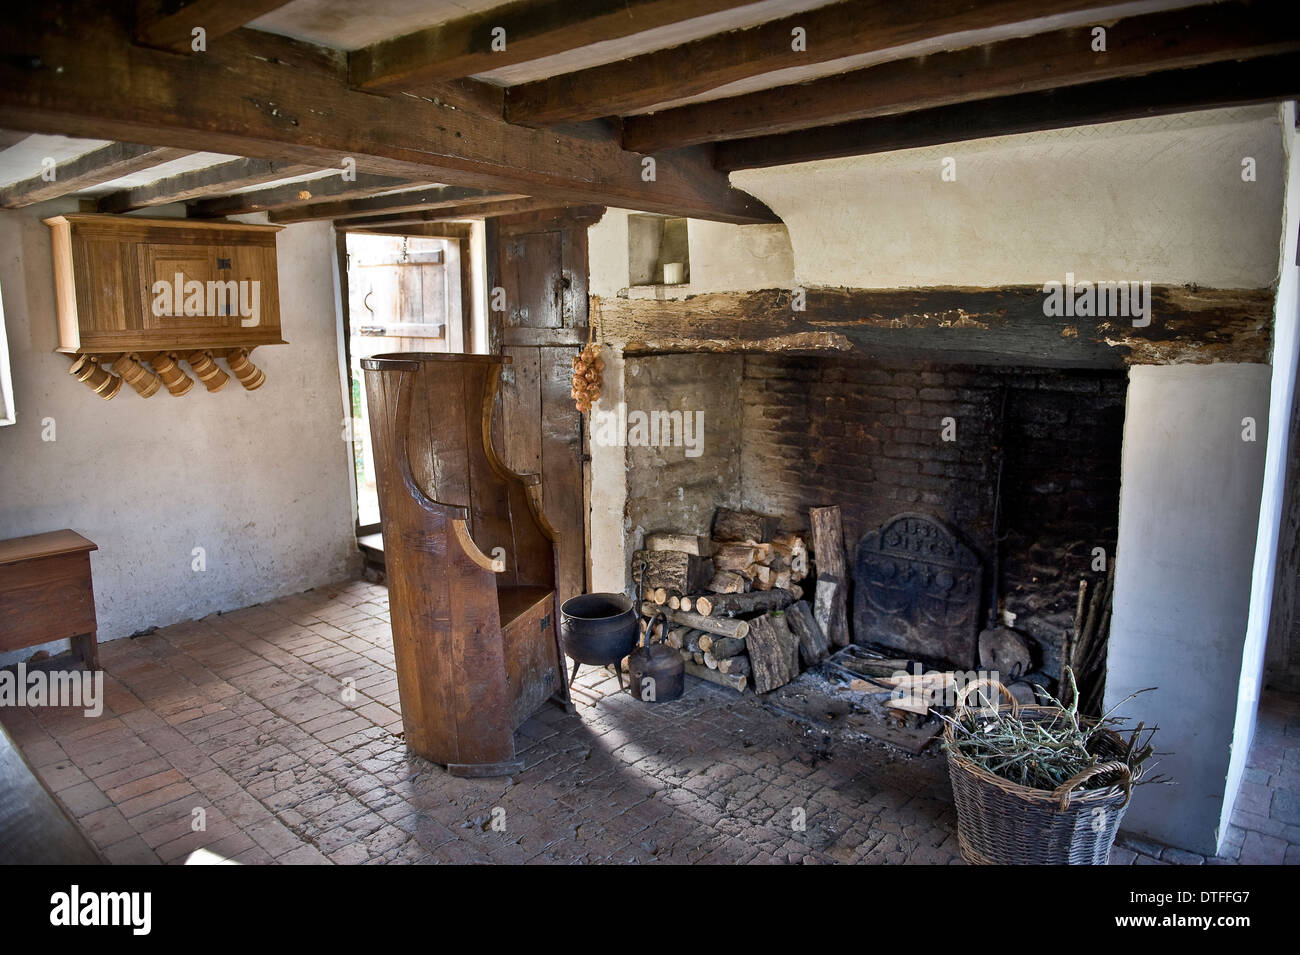 Domestic interior at the Weald & Downland Open Air Museum at Singleton, near Chichester, West Sussex, UK Stock Photo